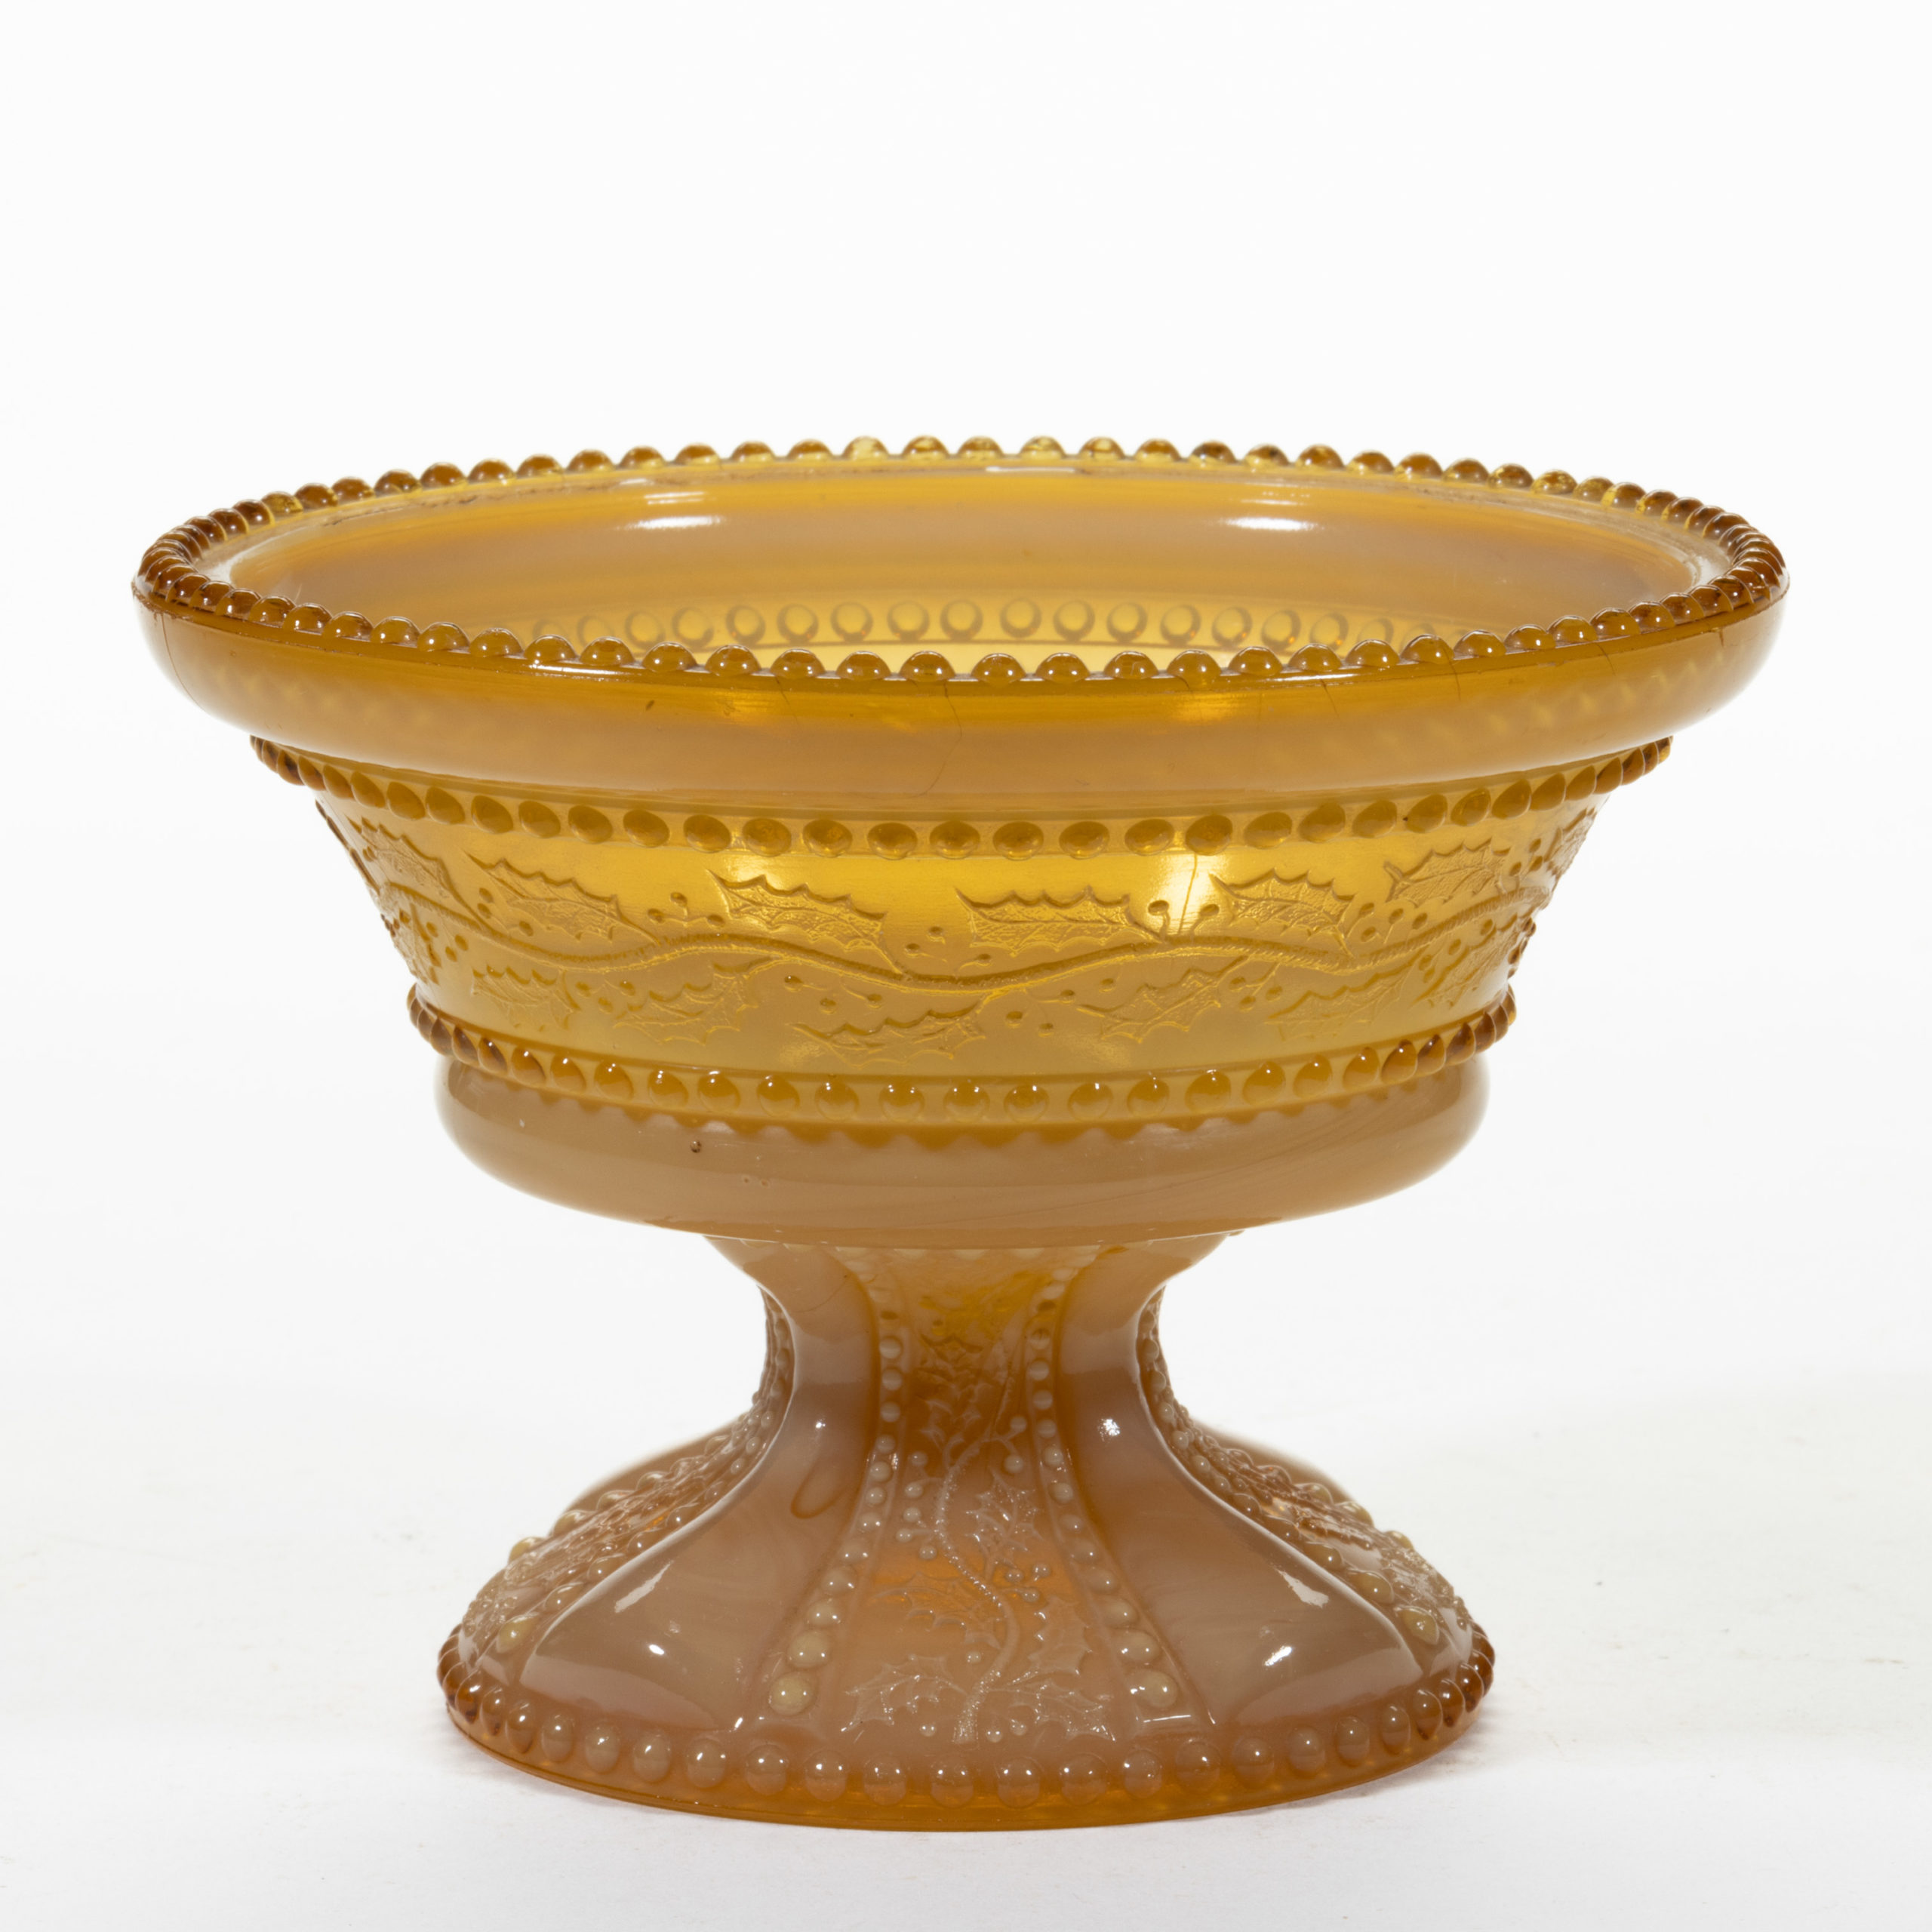 GREENTOWN NO. 450 / HOLLY AMBER JELLY COMPOTE,